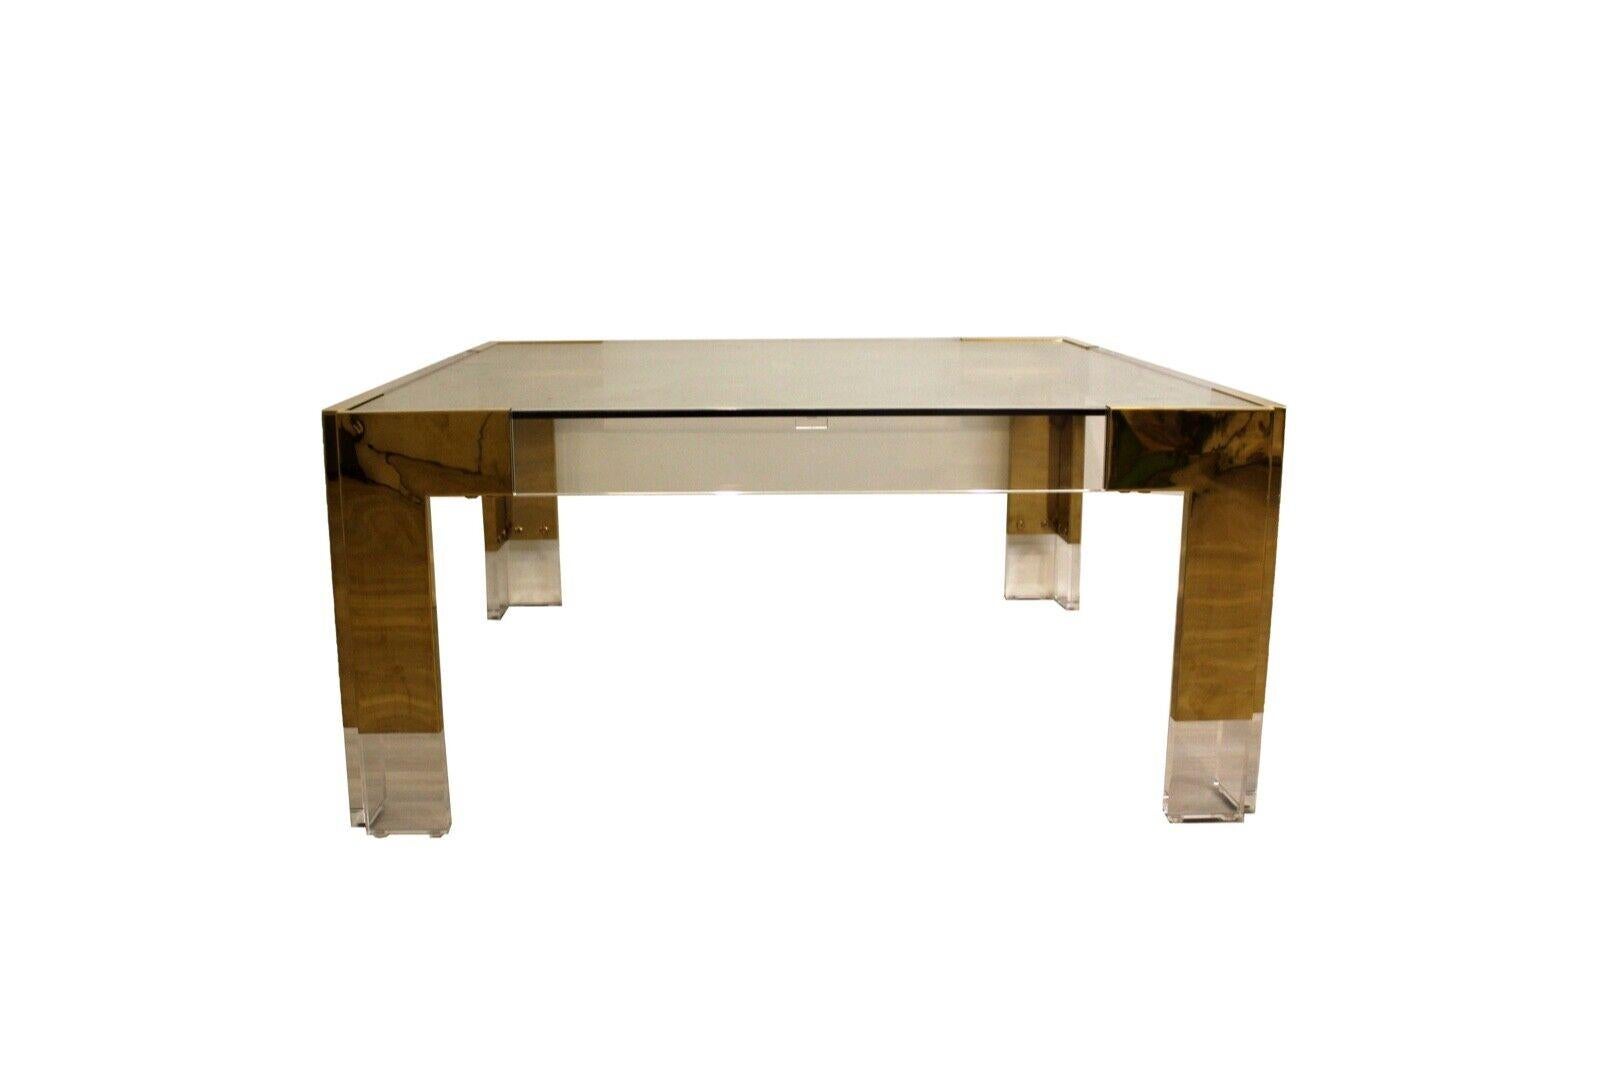 Le Shoppe Too presents this beautiful lucite, glass and brass square coffee table attributed to Charles Hollis jones. In good condition. Dimensions: 36